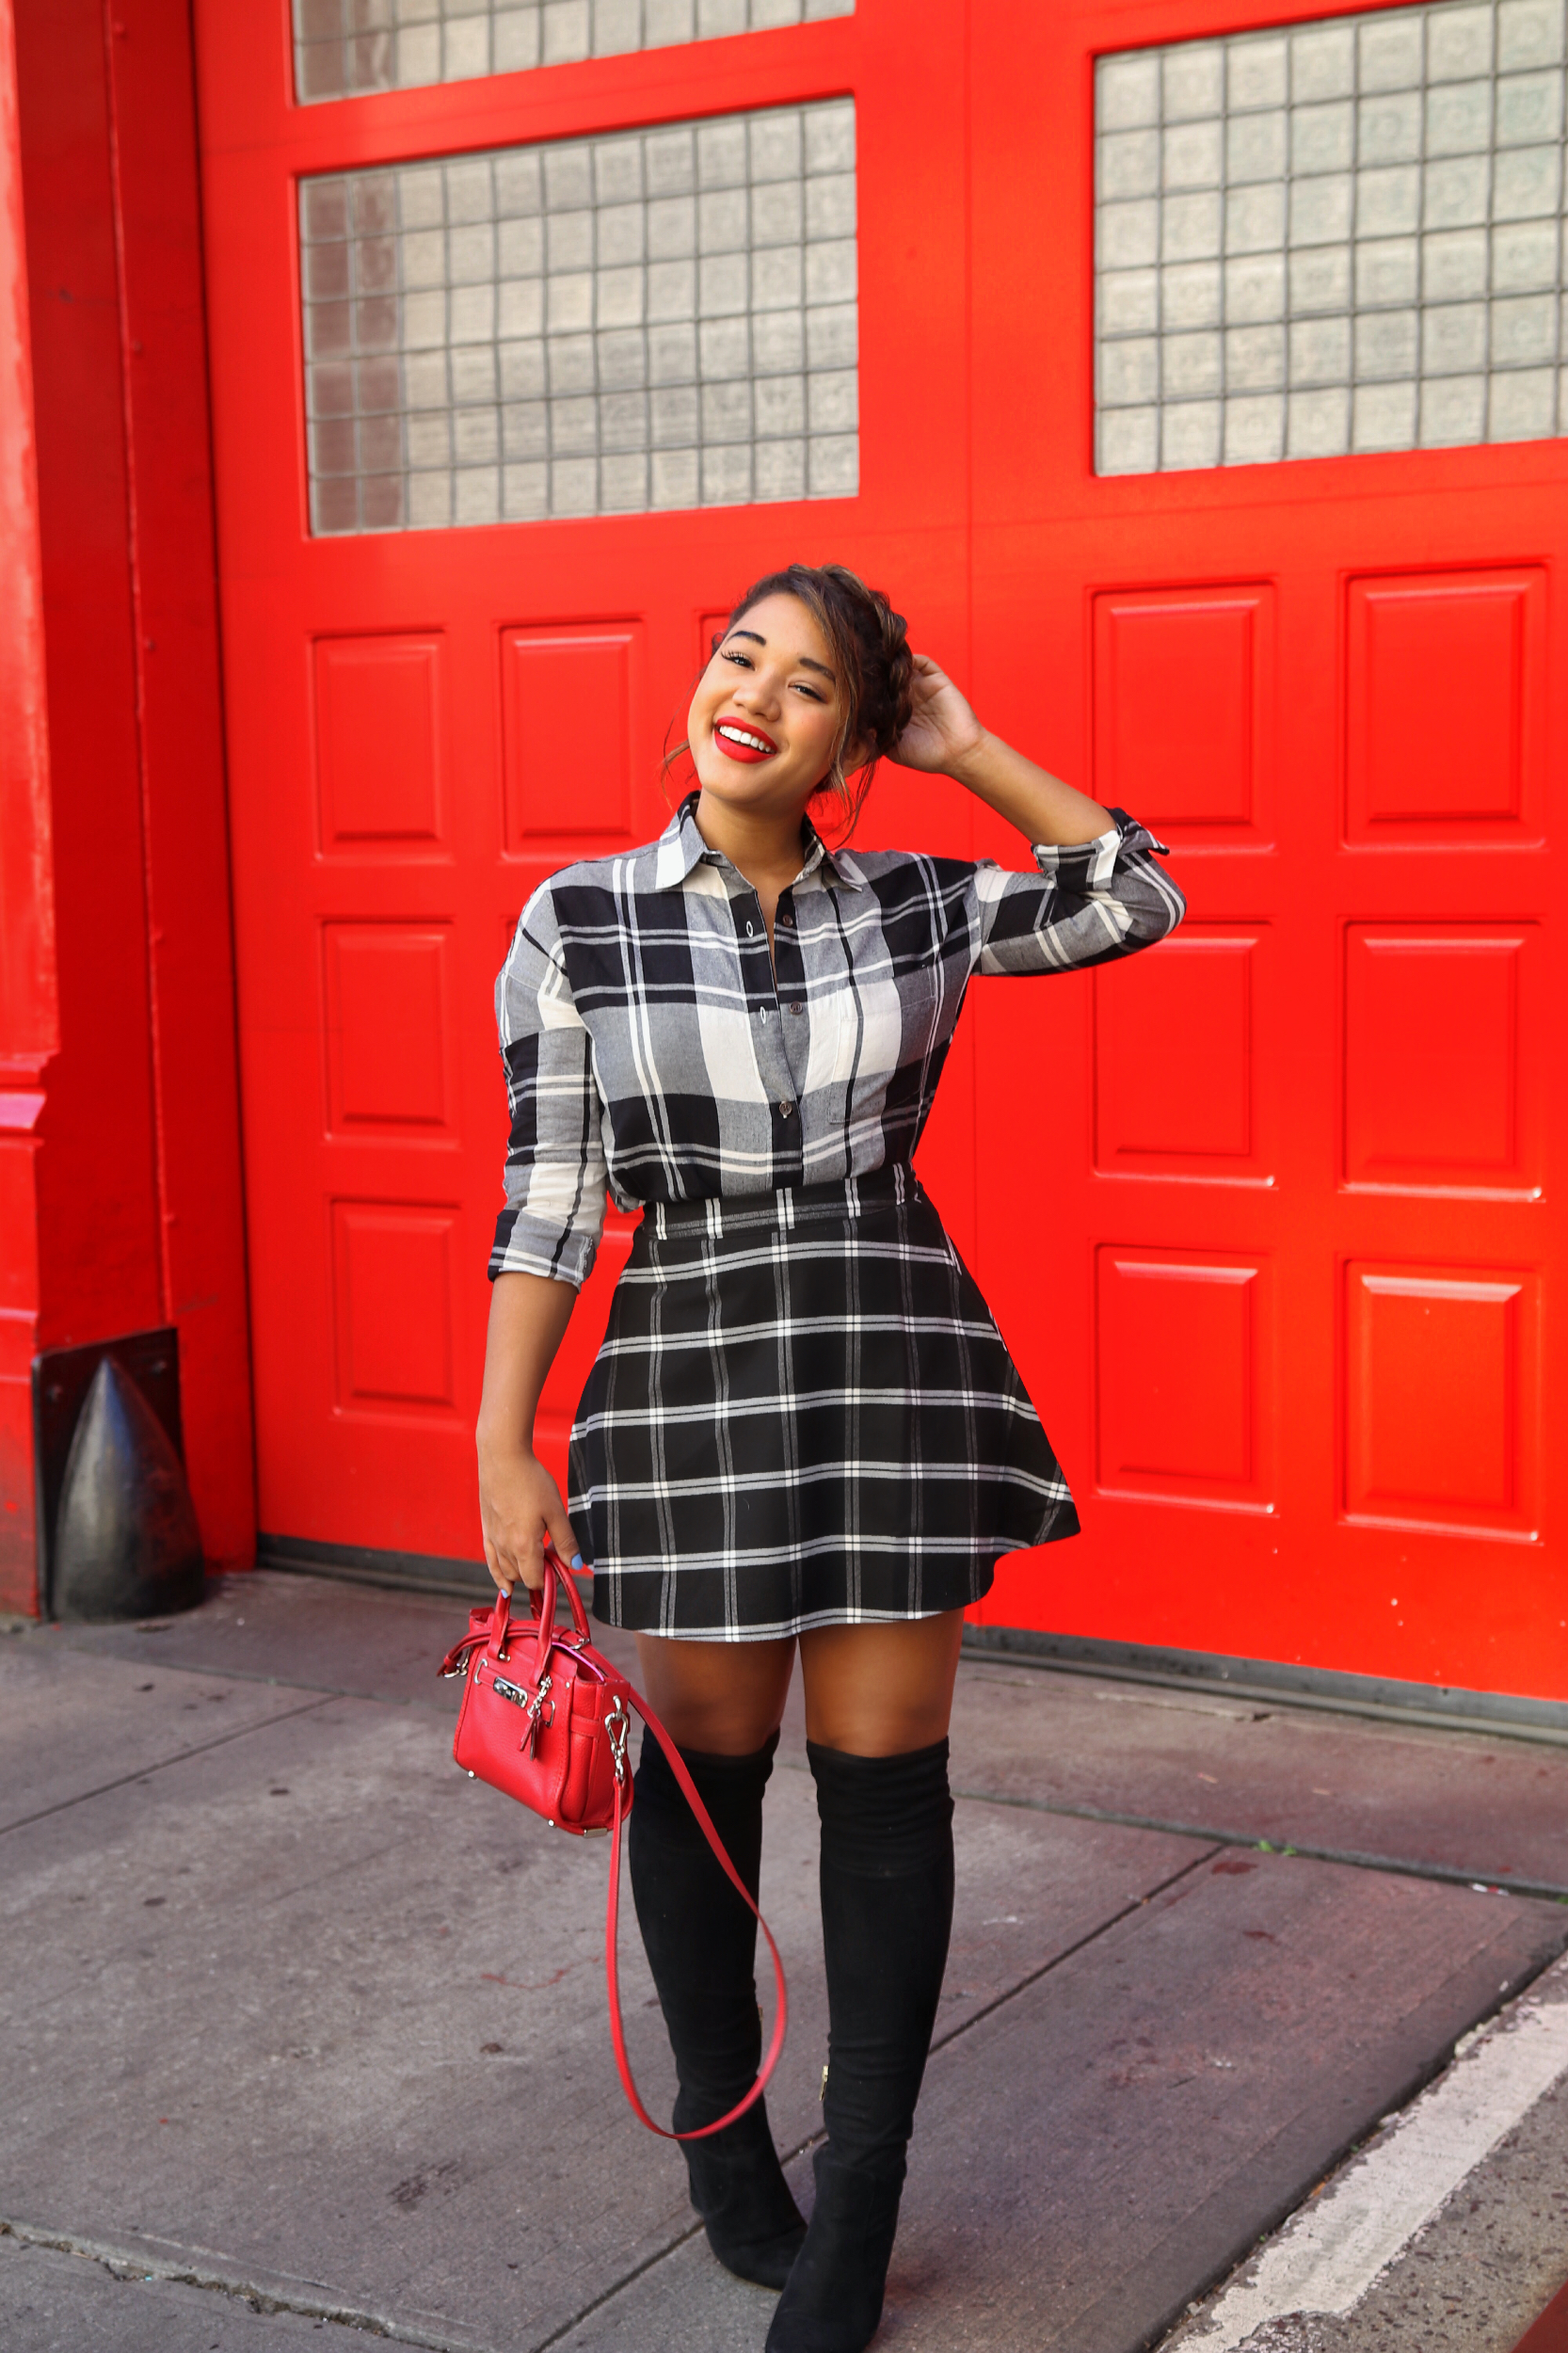 Plaid Mixing! Fall style by Color Me Courtney (@colormecourtney) // How to wear plaid for fall #plaid #overthekneeboots #otkboot #patternmixing #blackandwhite